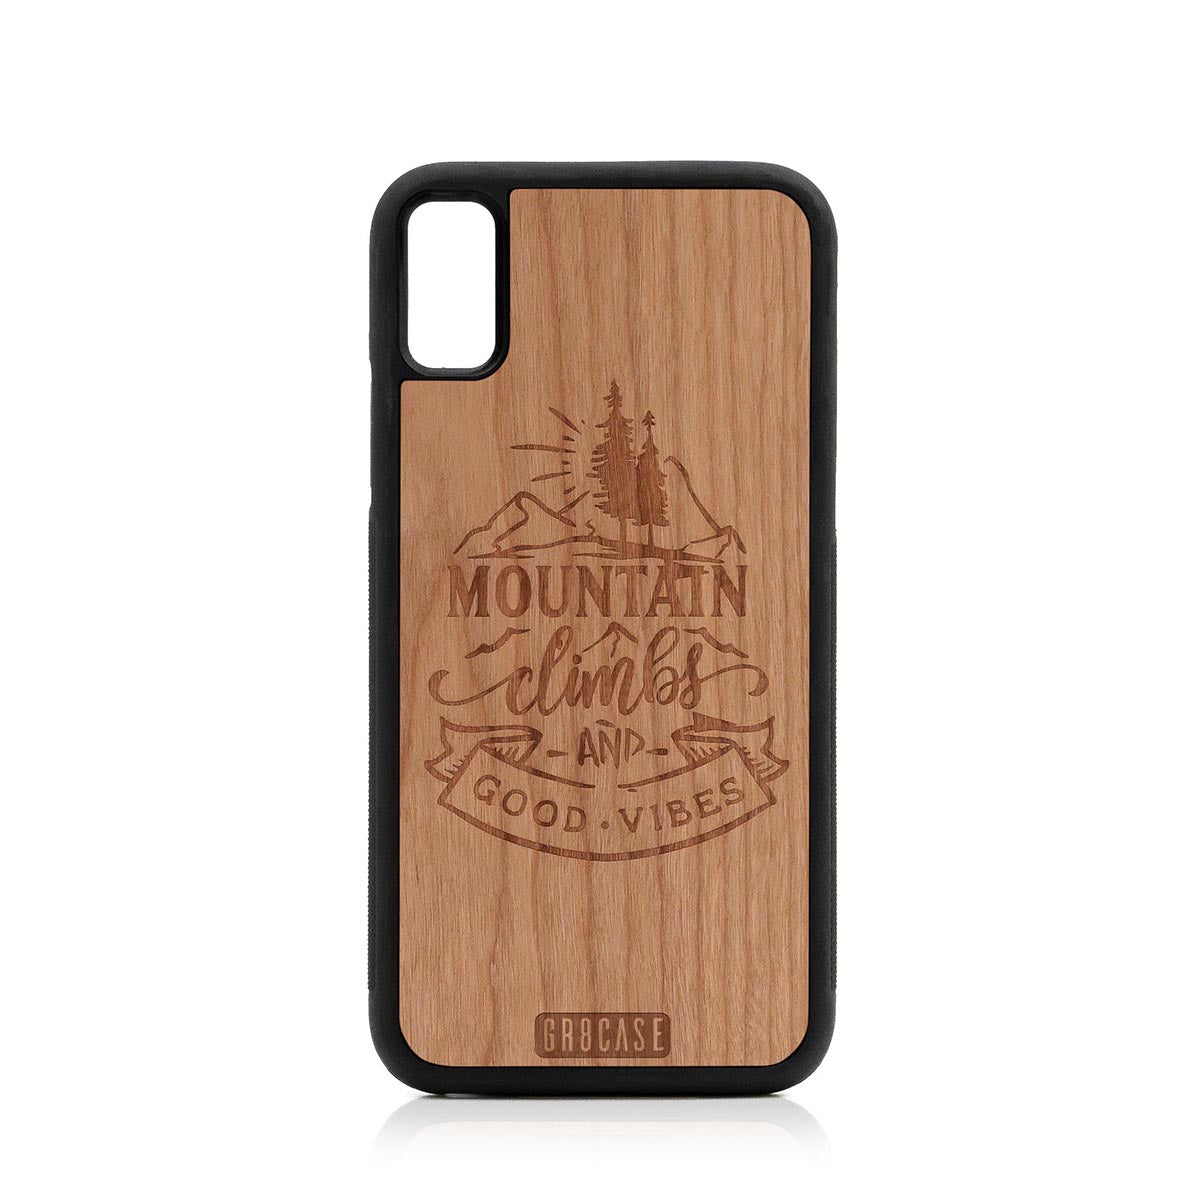 Mountain Climbs And Good Vibes Design Wood Case For iPhone XS Max by GR8CASE